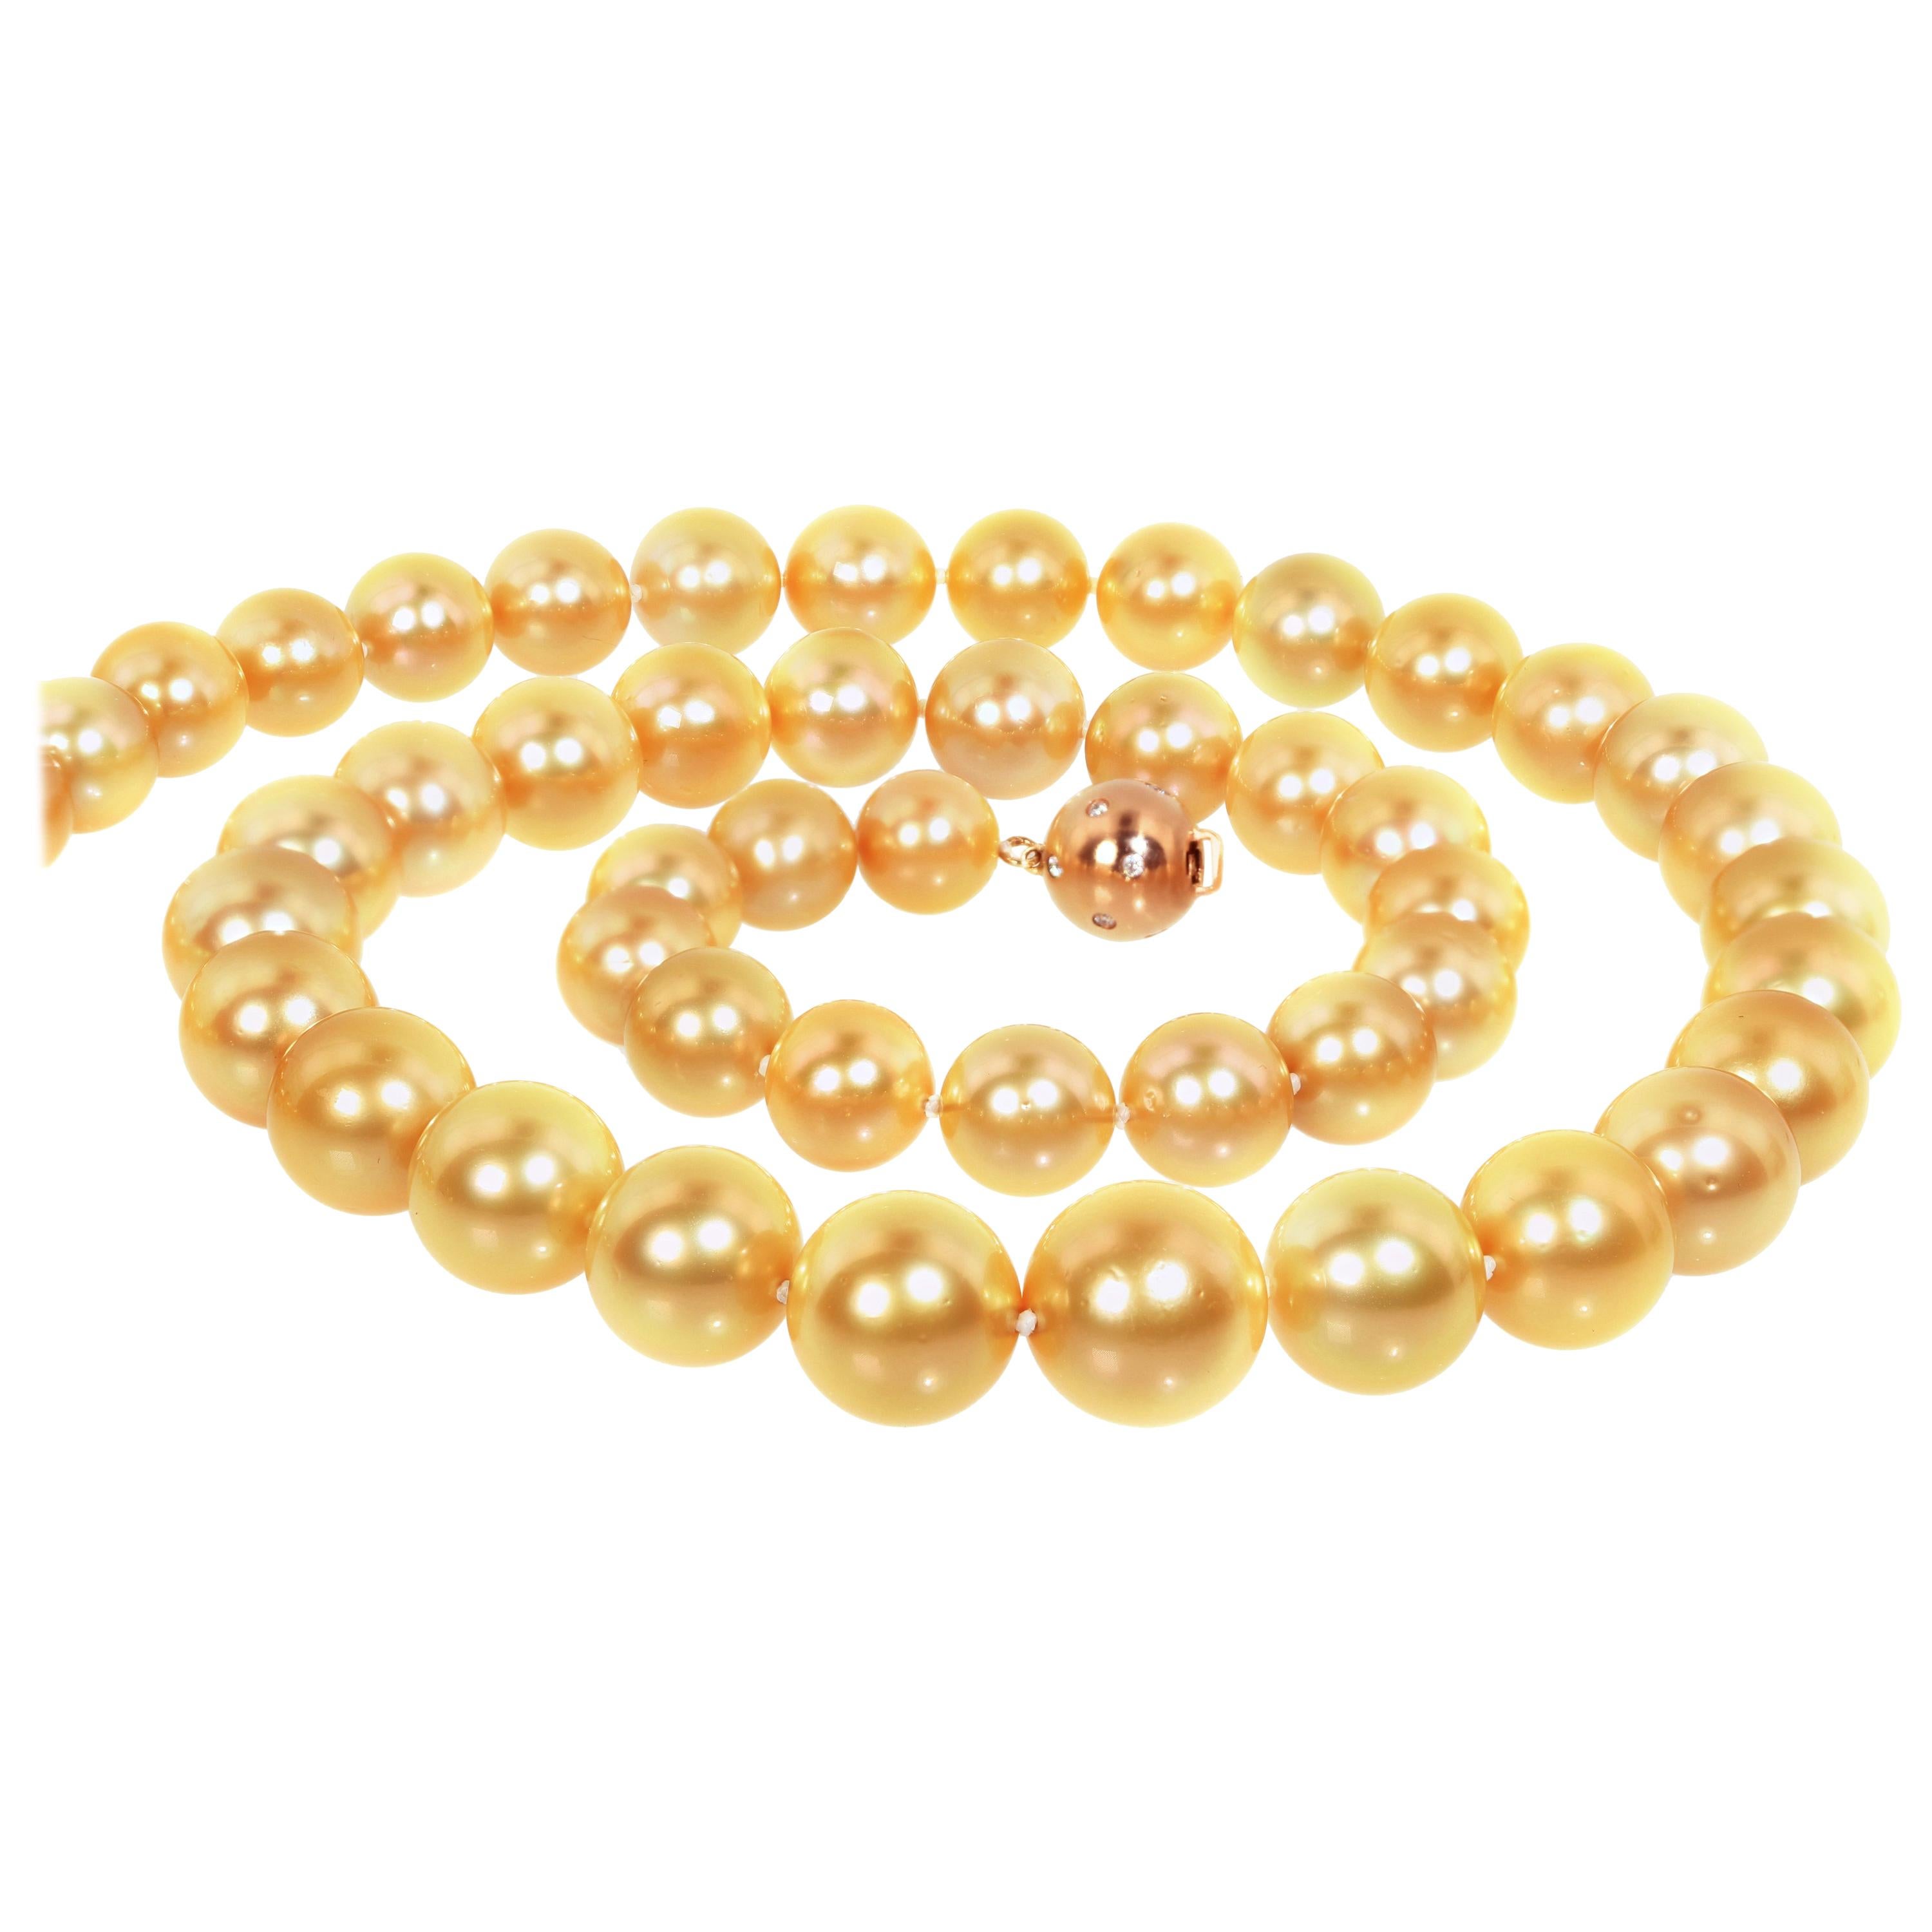 Golden South Sea Pearls 10-12 MM Strand Necklace 18 Kt Gold Clasp 18 ...